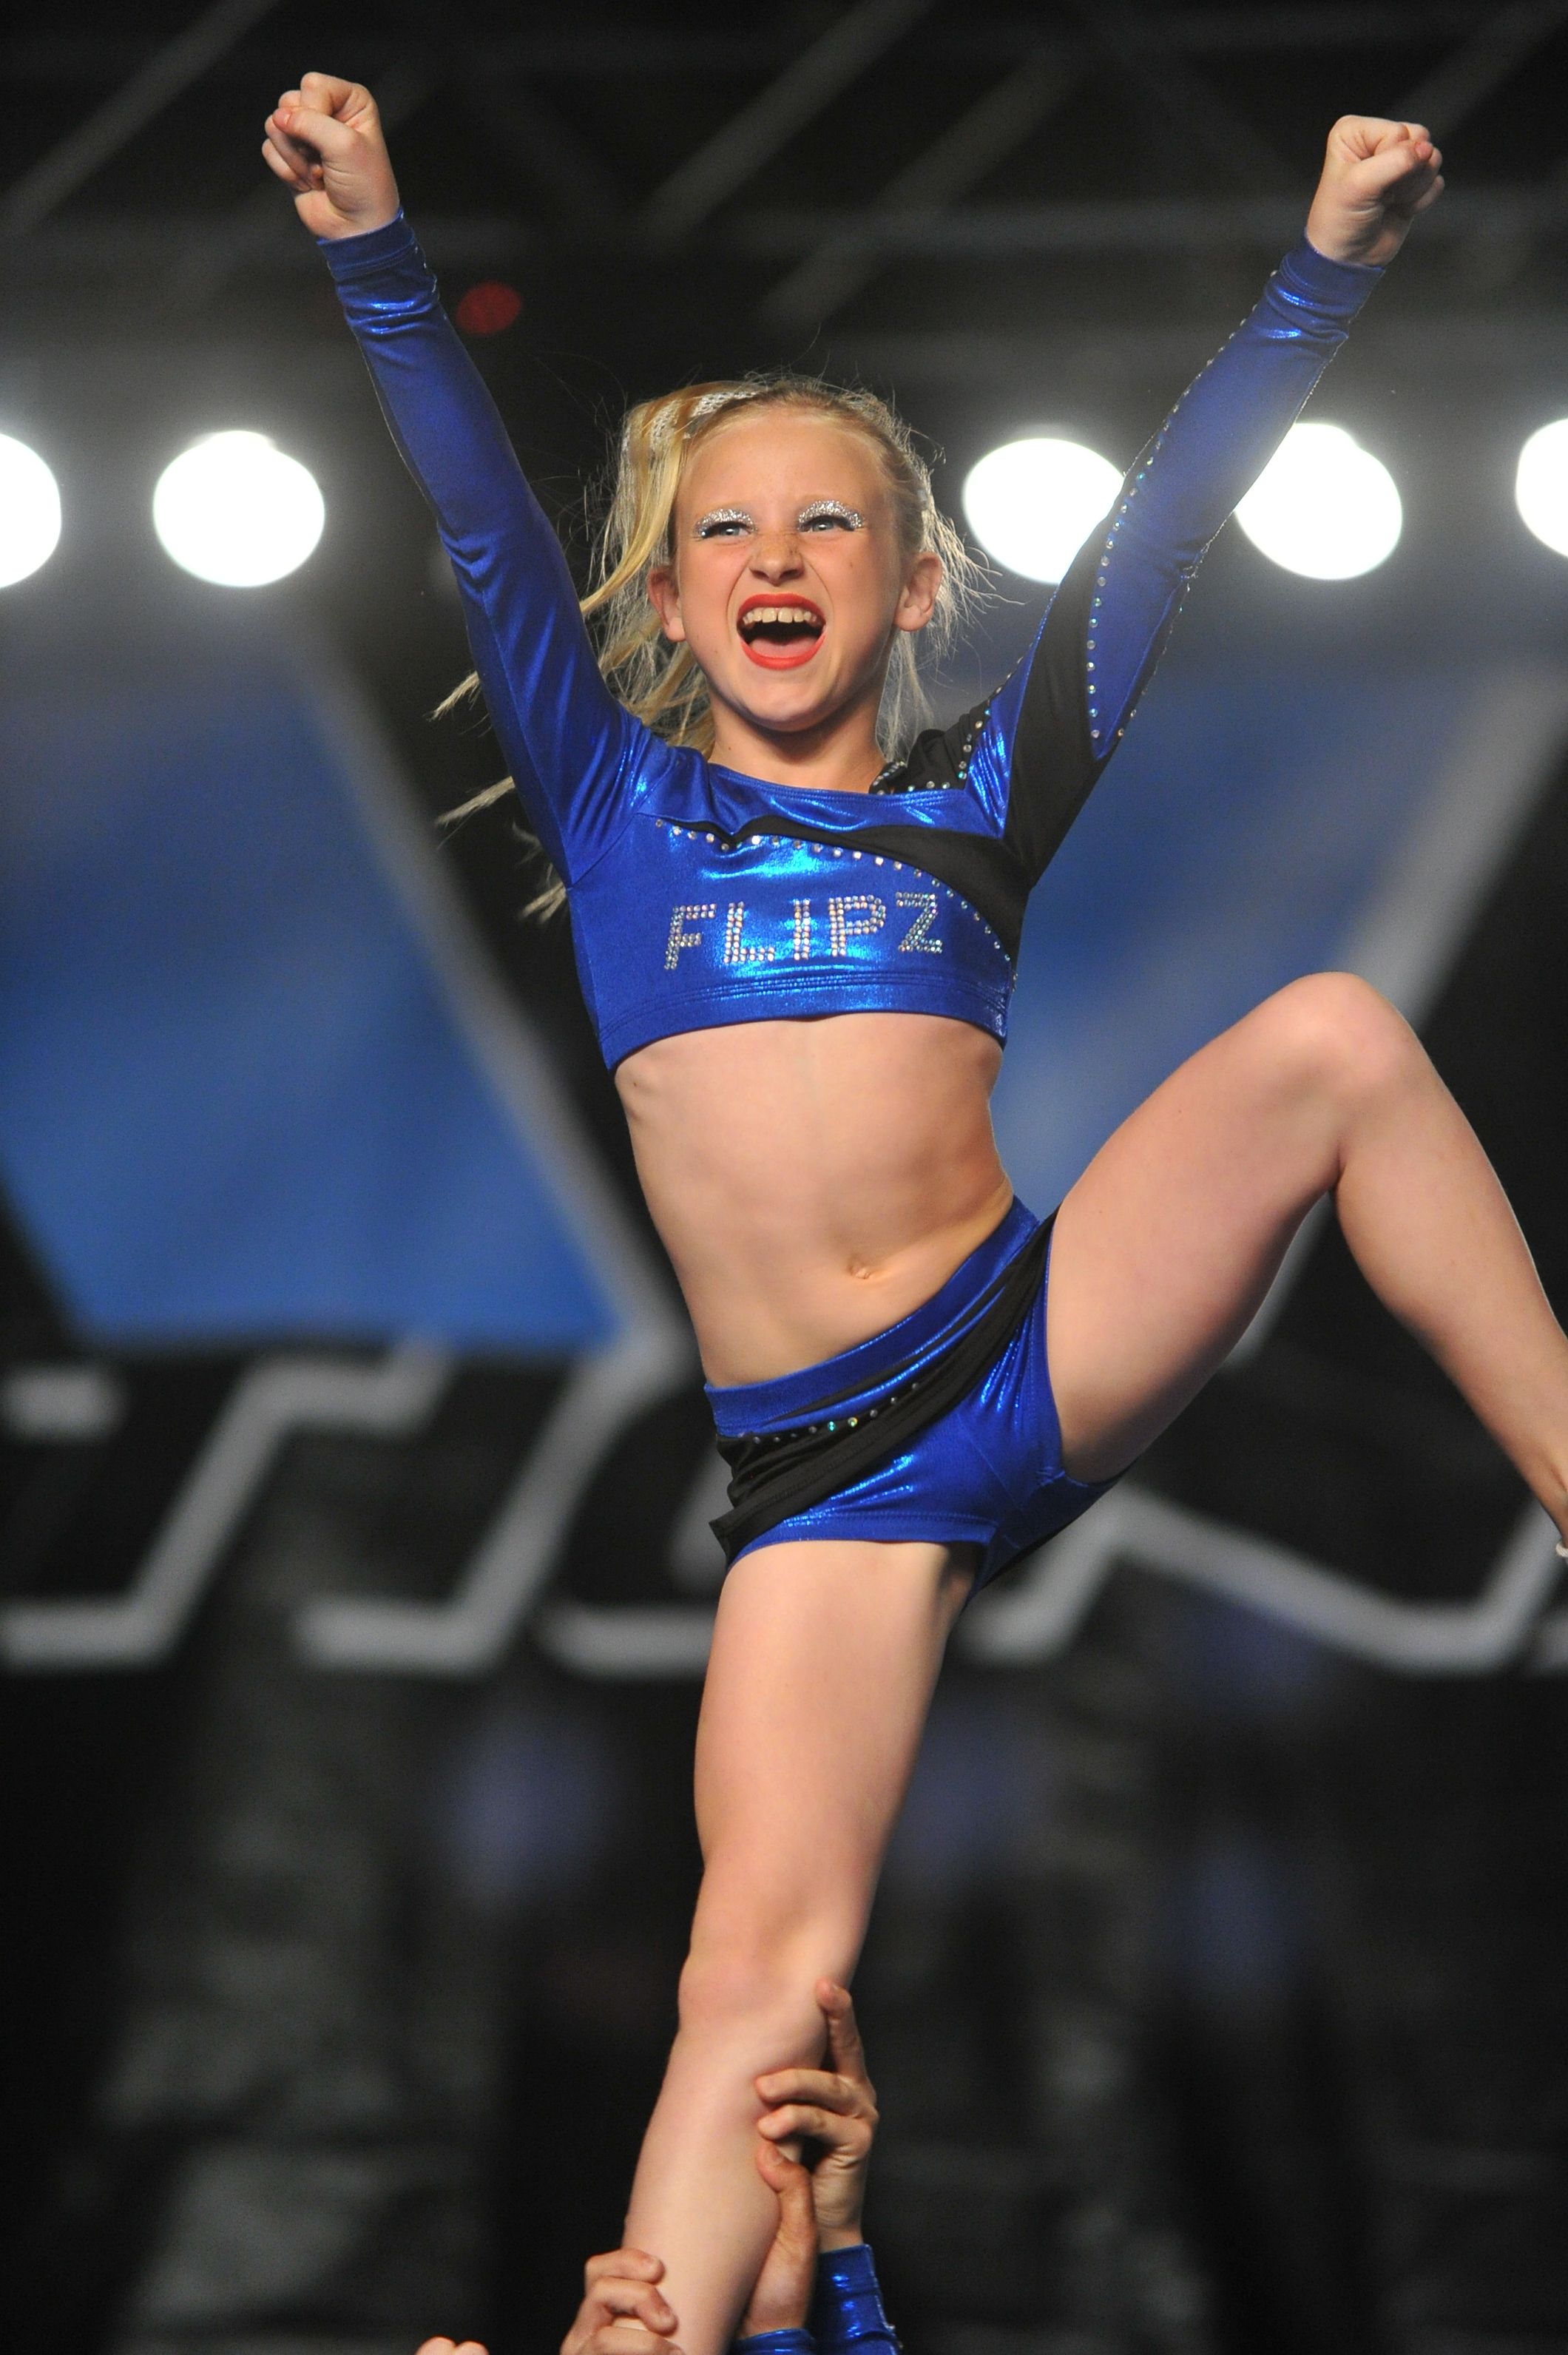 Image detail for -More love for GK Cheerleading Uniforms from Flipz ...